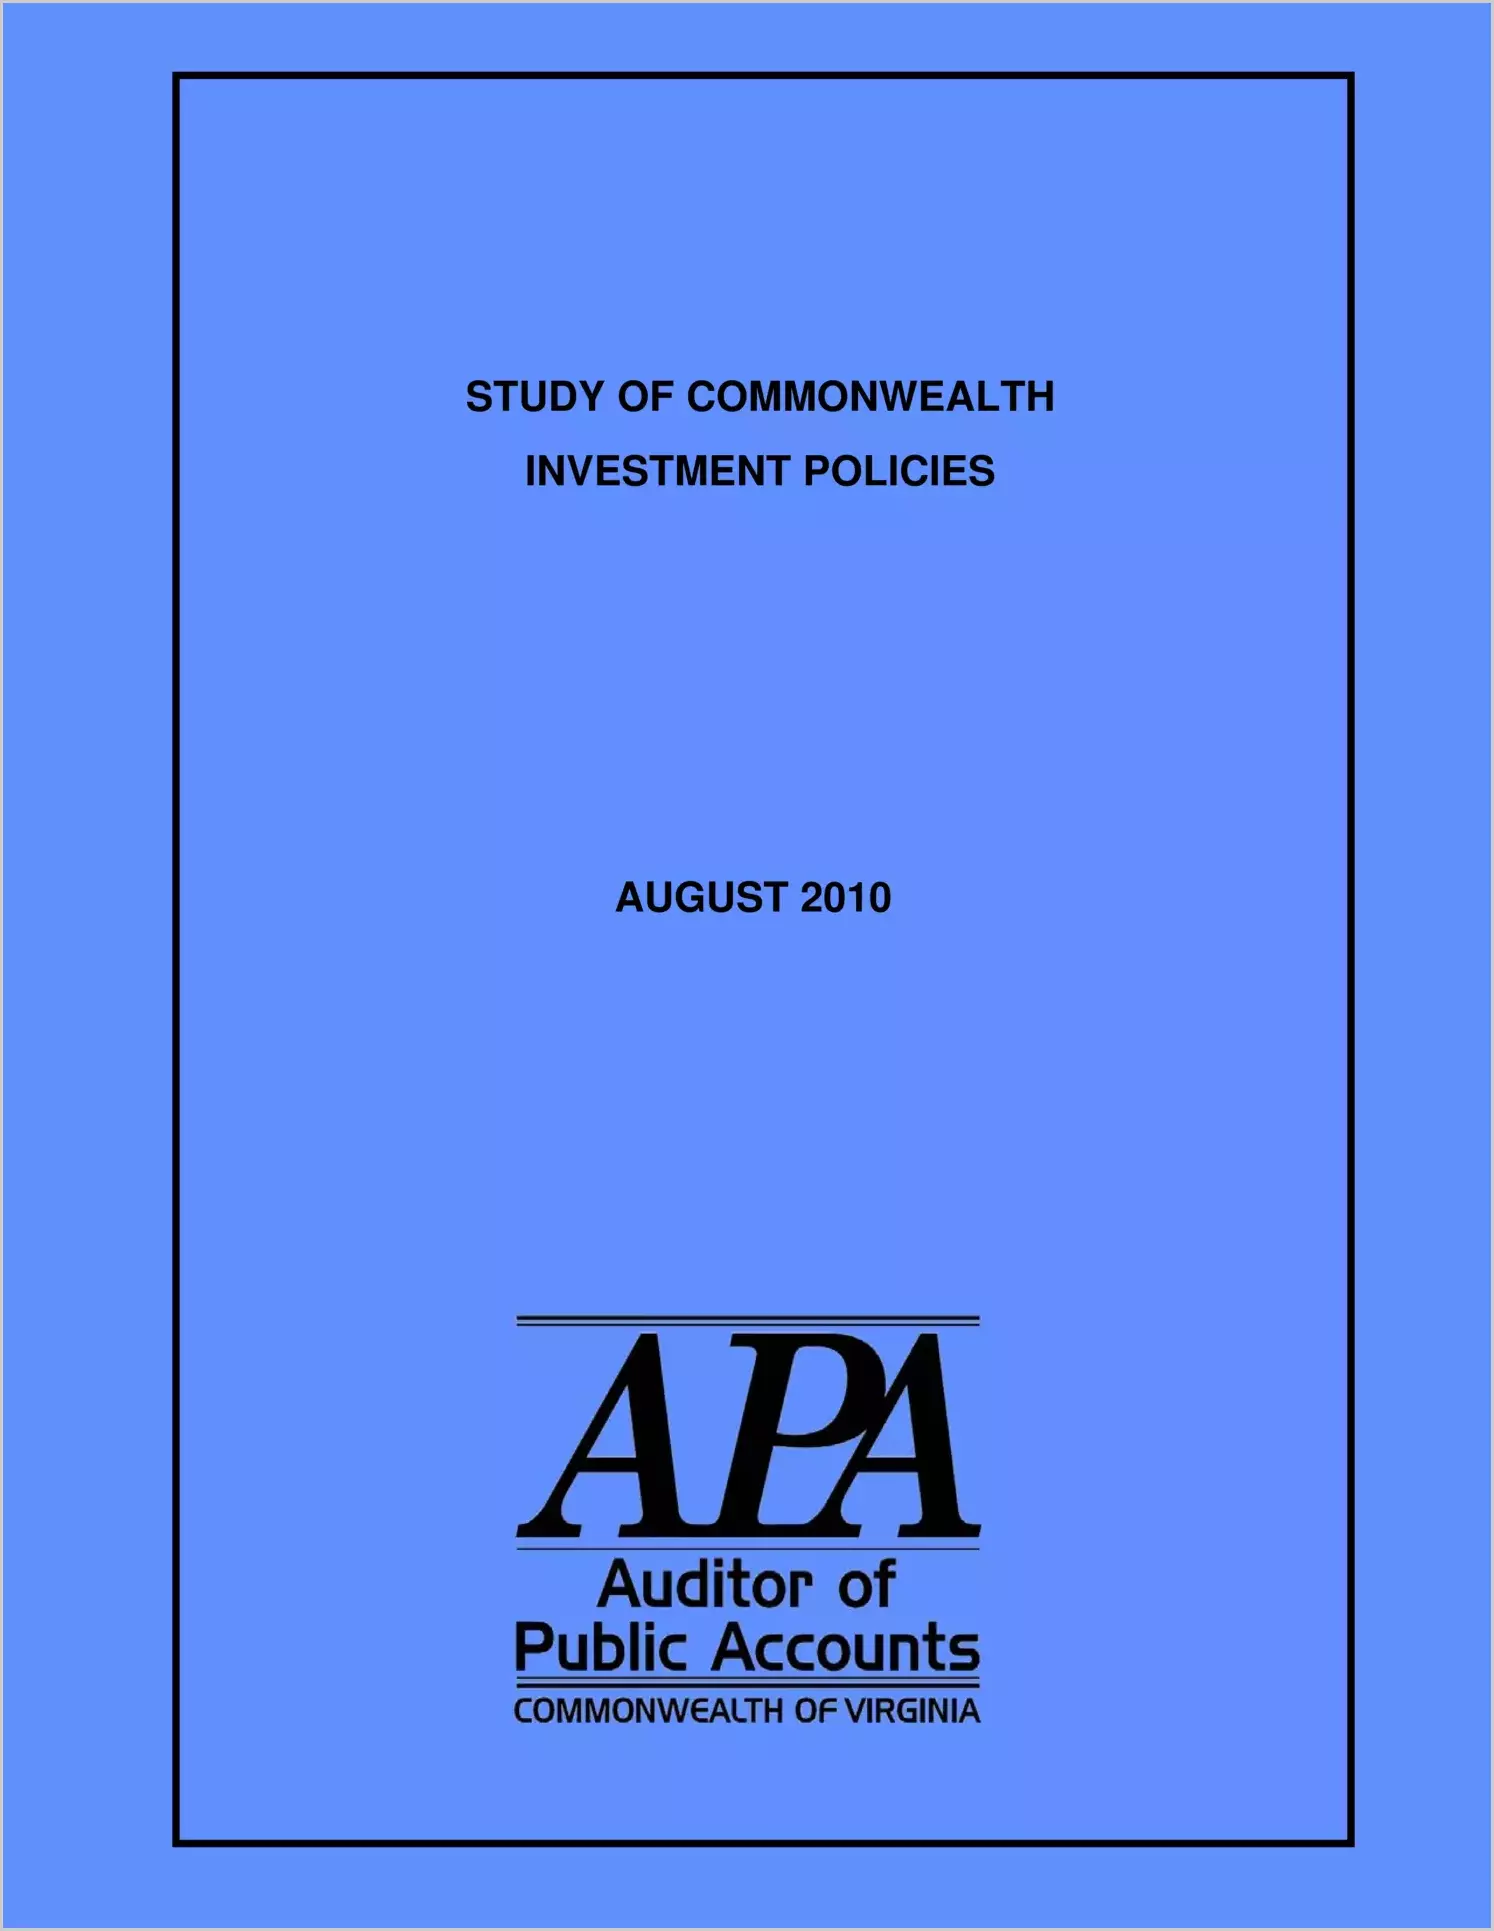 Study of Commonwealth Investment Policies, August 2010